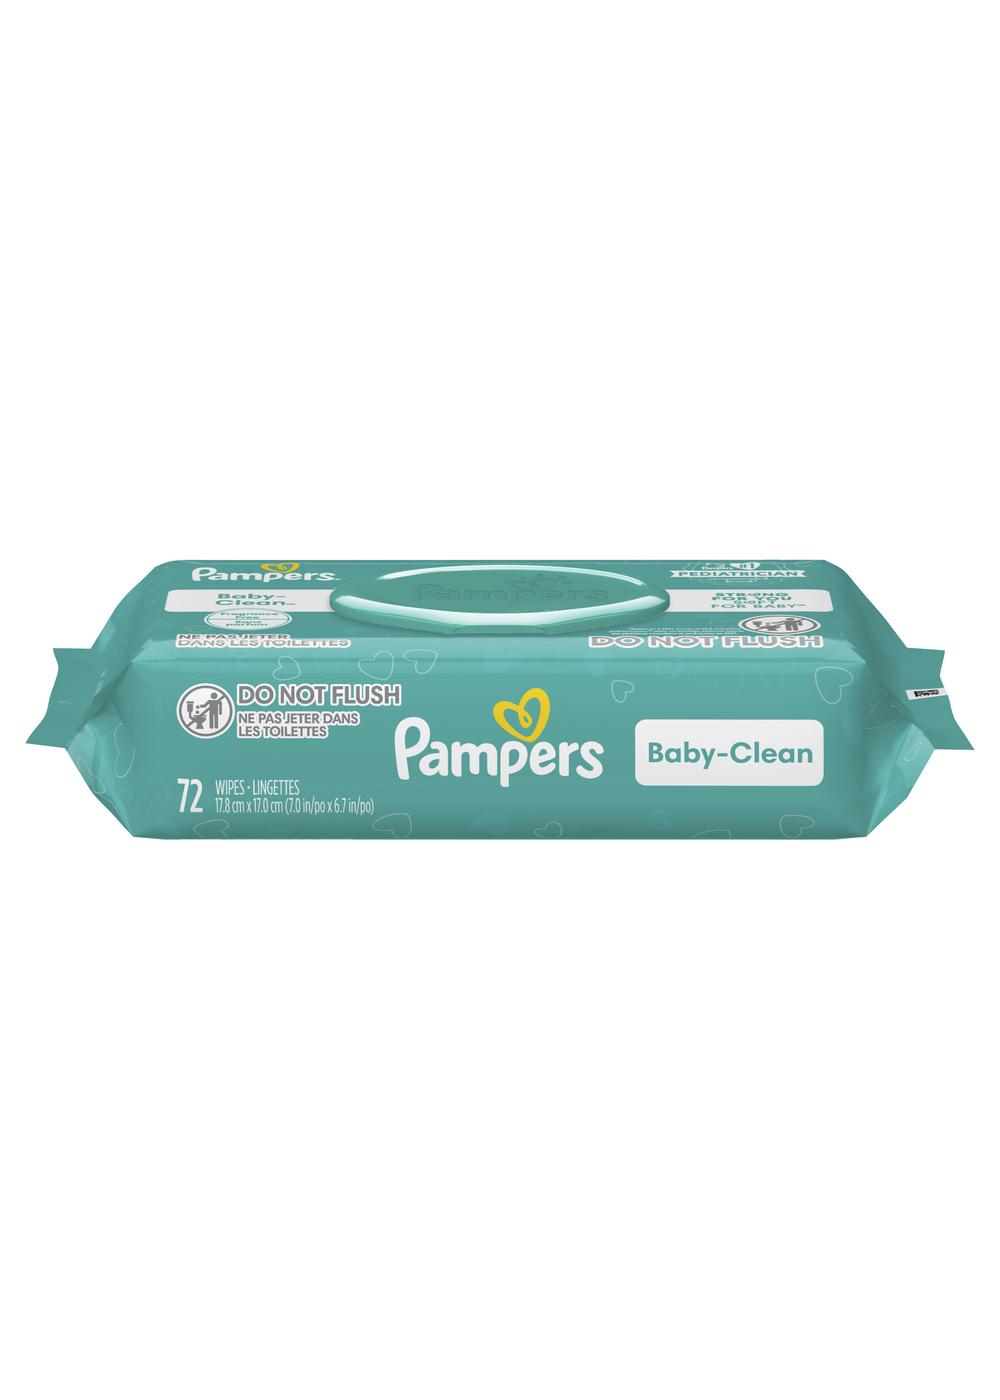 Pampers Baby Wipes - Fragrance Free; image 1 of 10